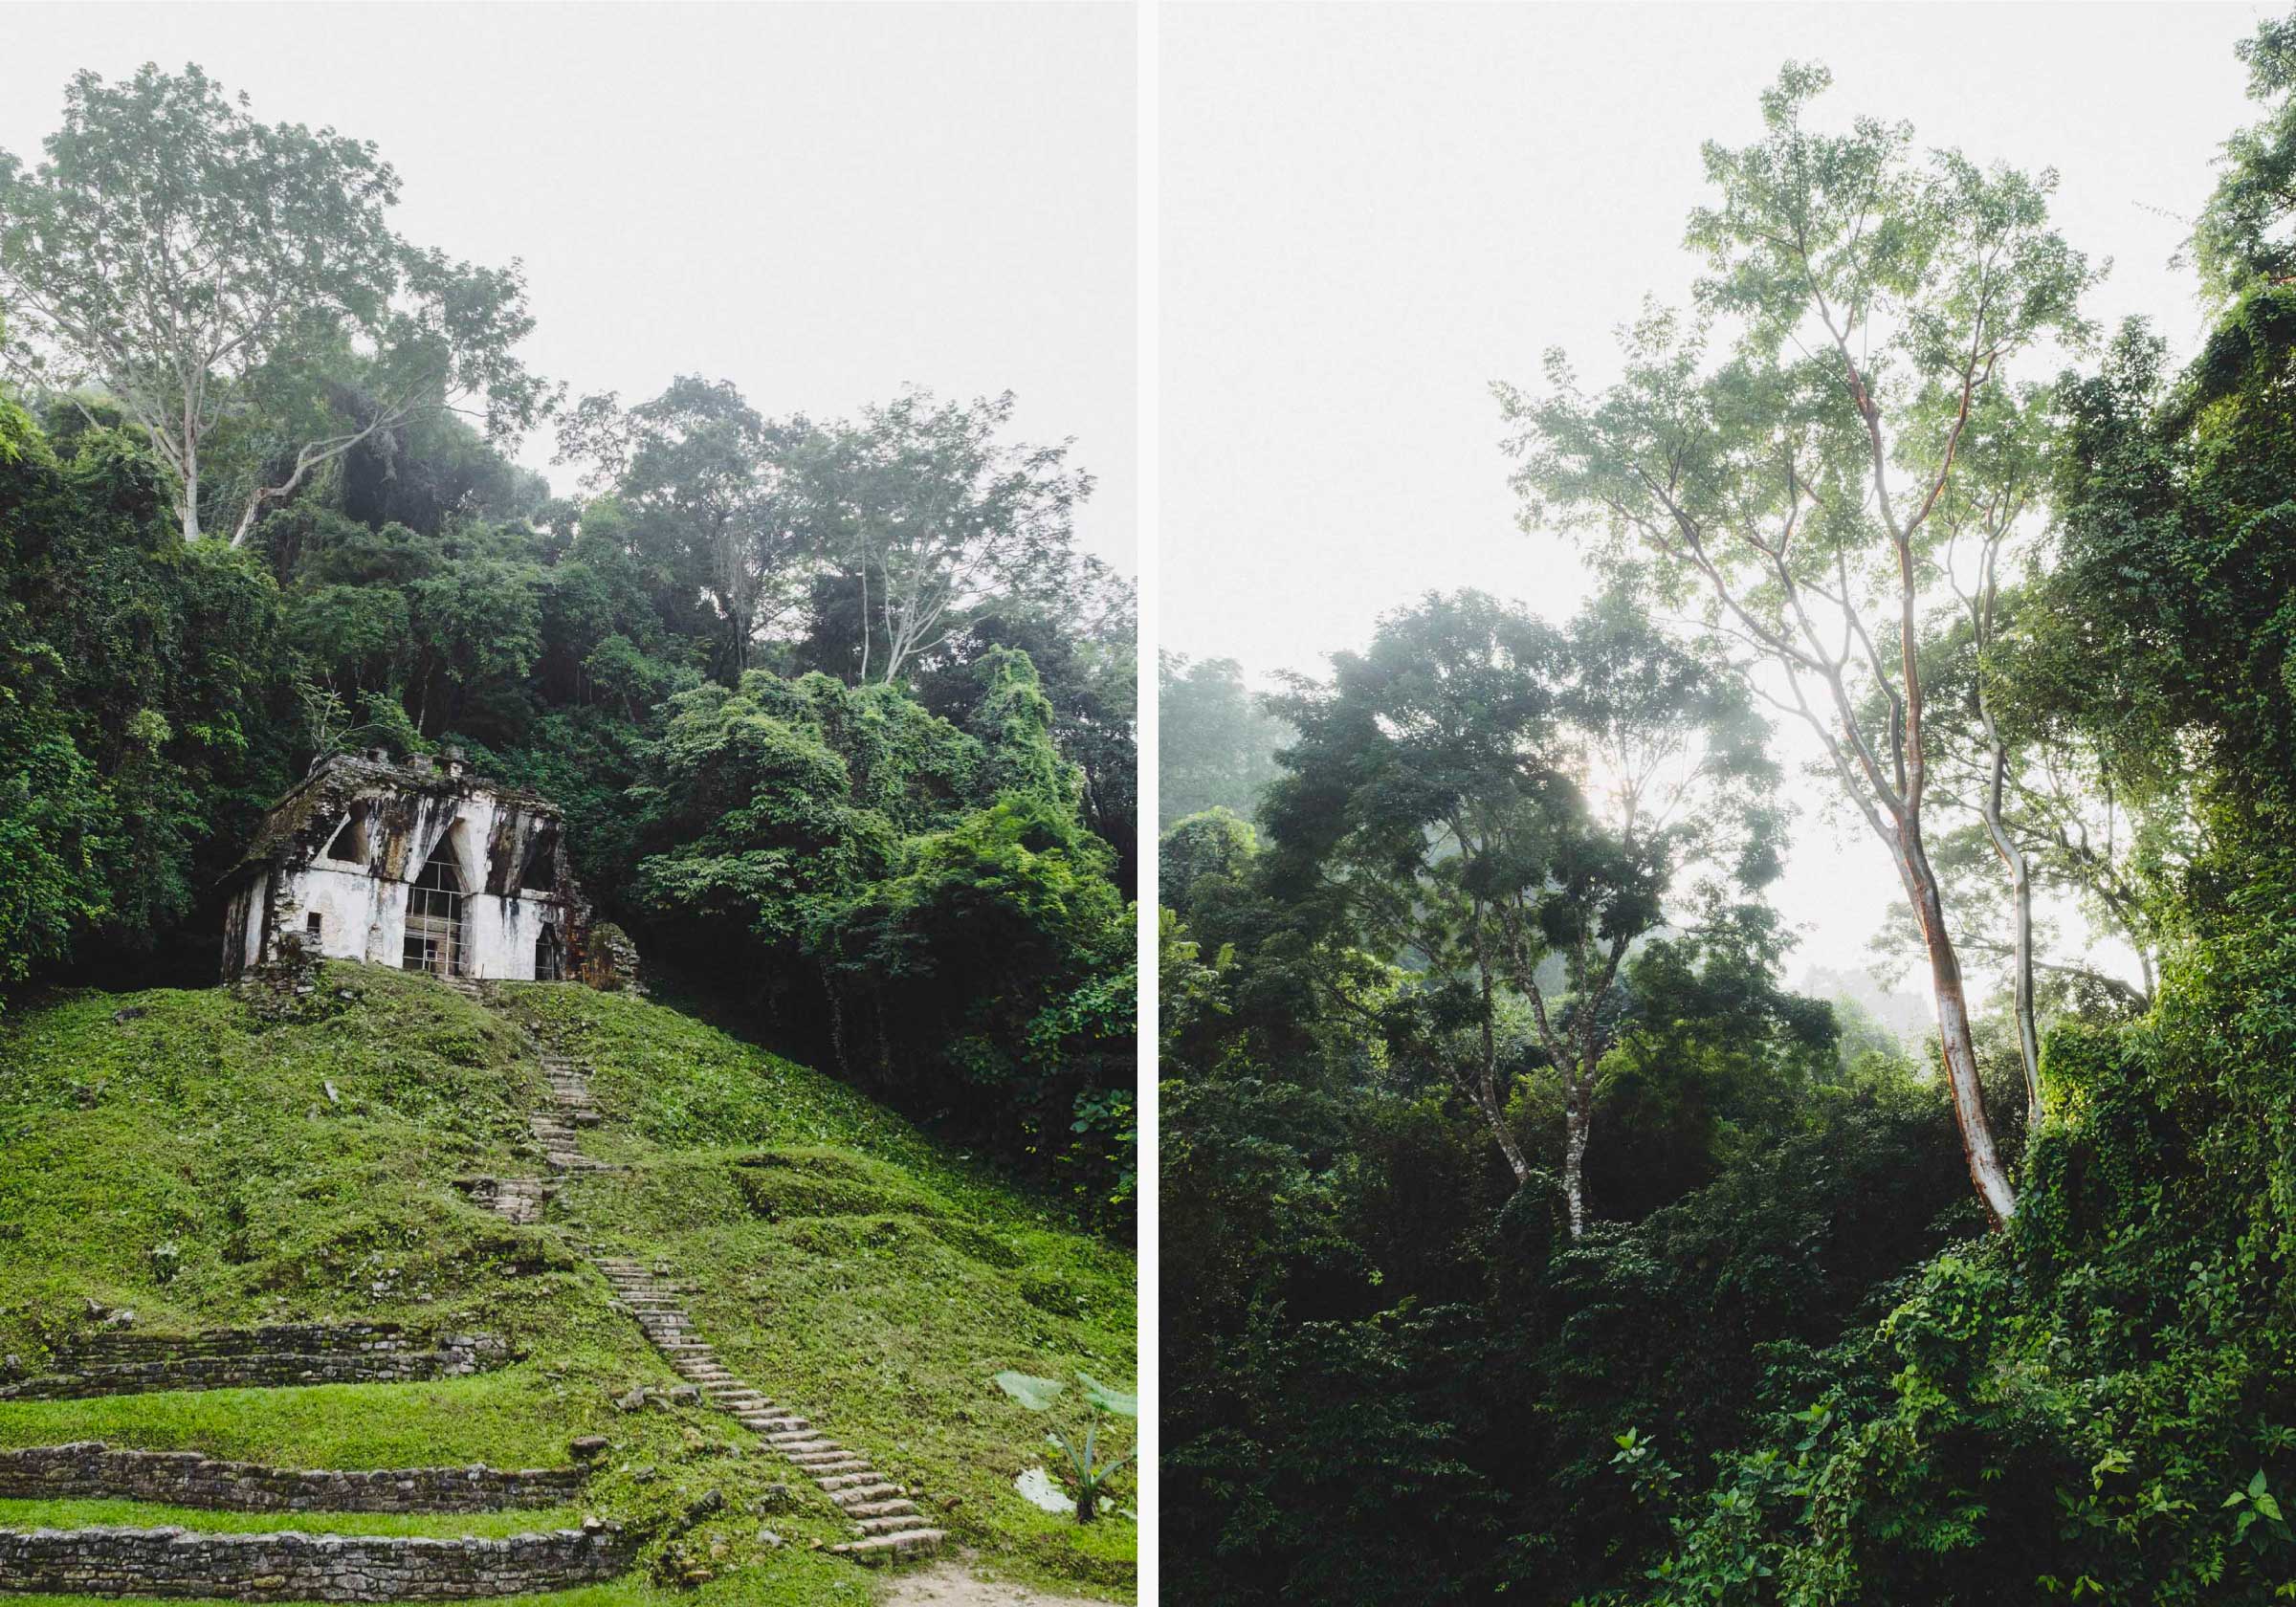 The ruins of Palenque